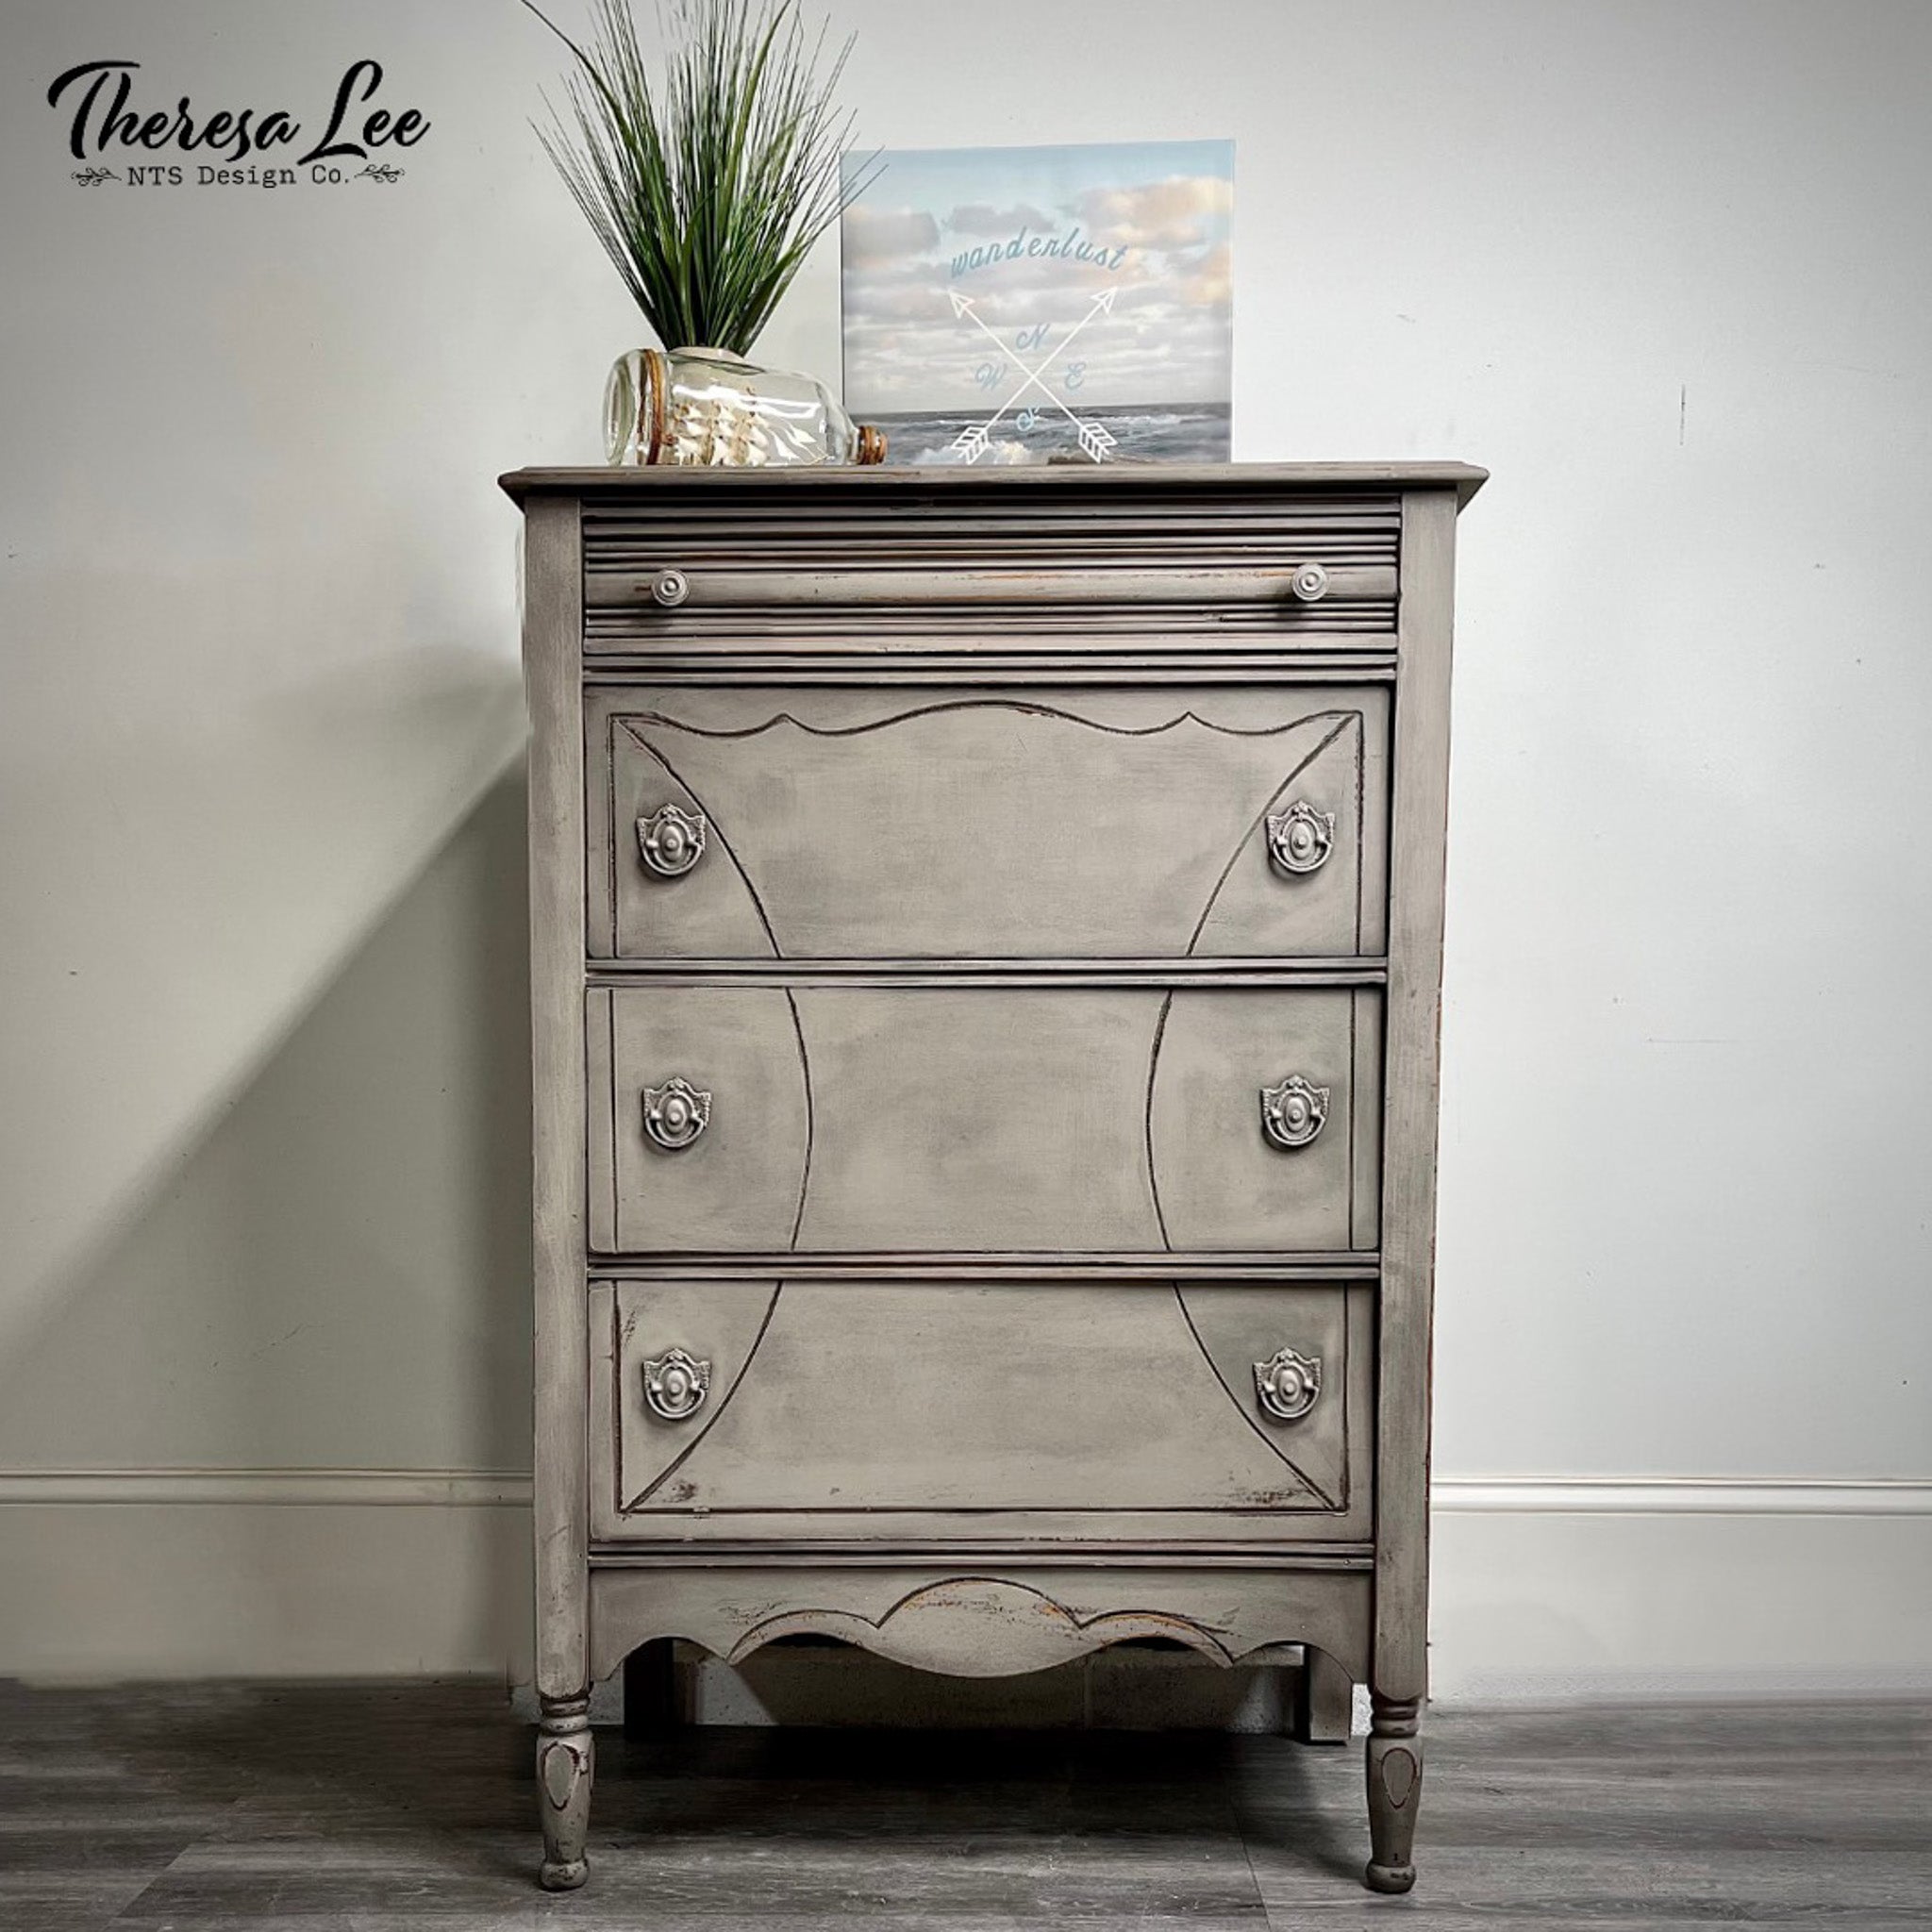 A vintage 4-drawer chest dresser refurbished by Theresa Lee NTS Design Company is painted in Dixie Belle's French Linen chalk mineral paint.